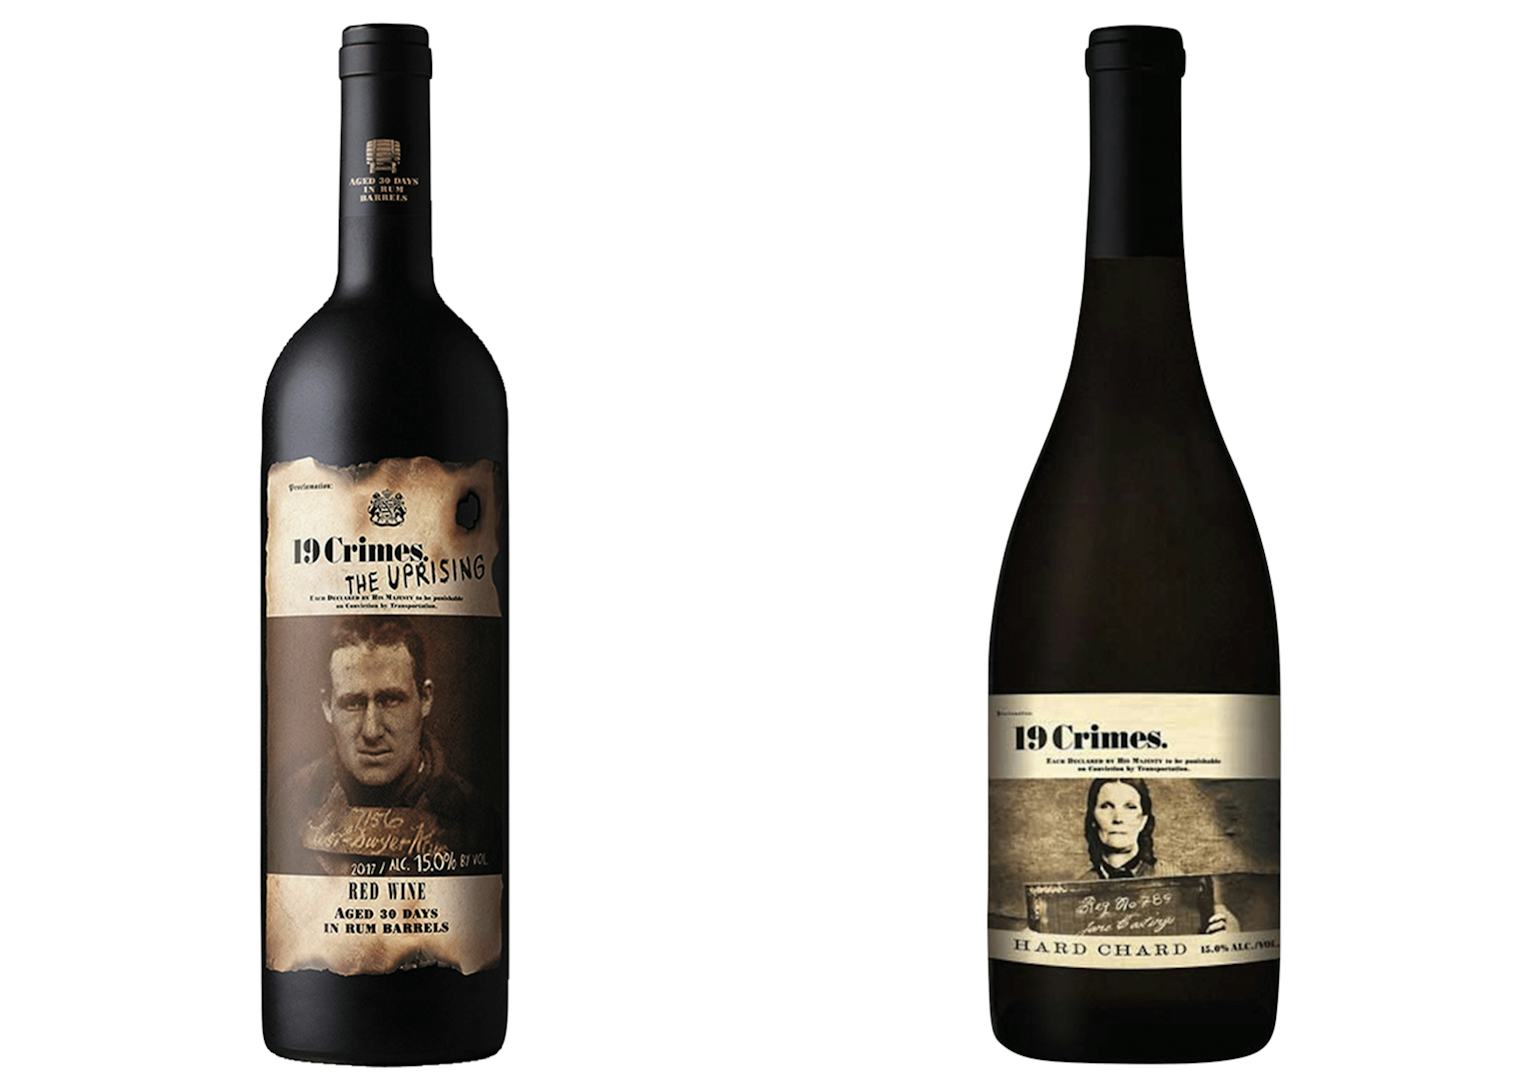 19-crimes-wine-is-based-on-the-dark-history-of-actual-infamous-convicts